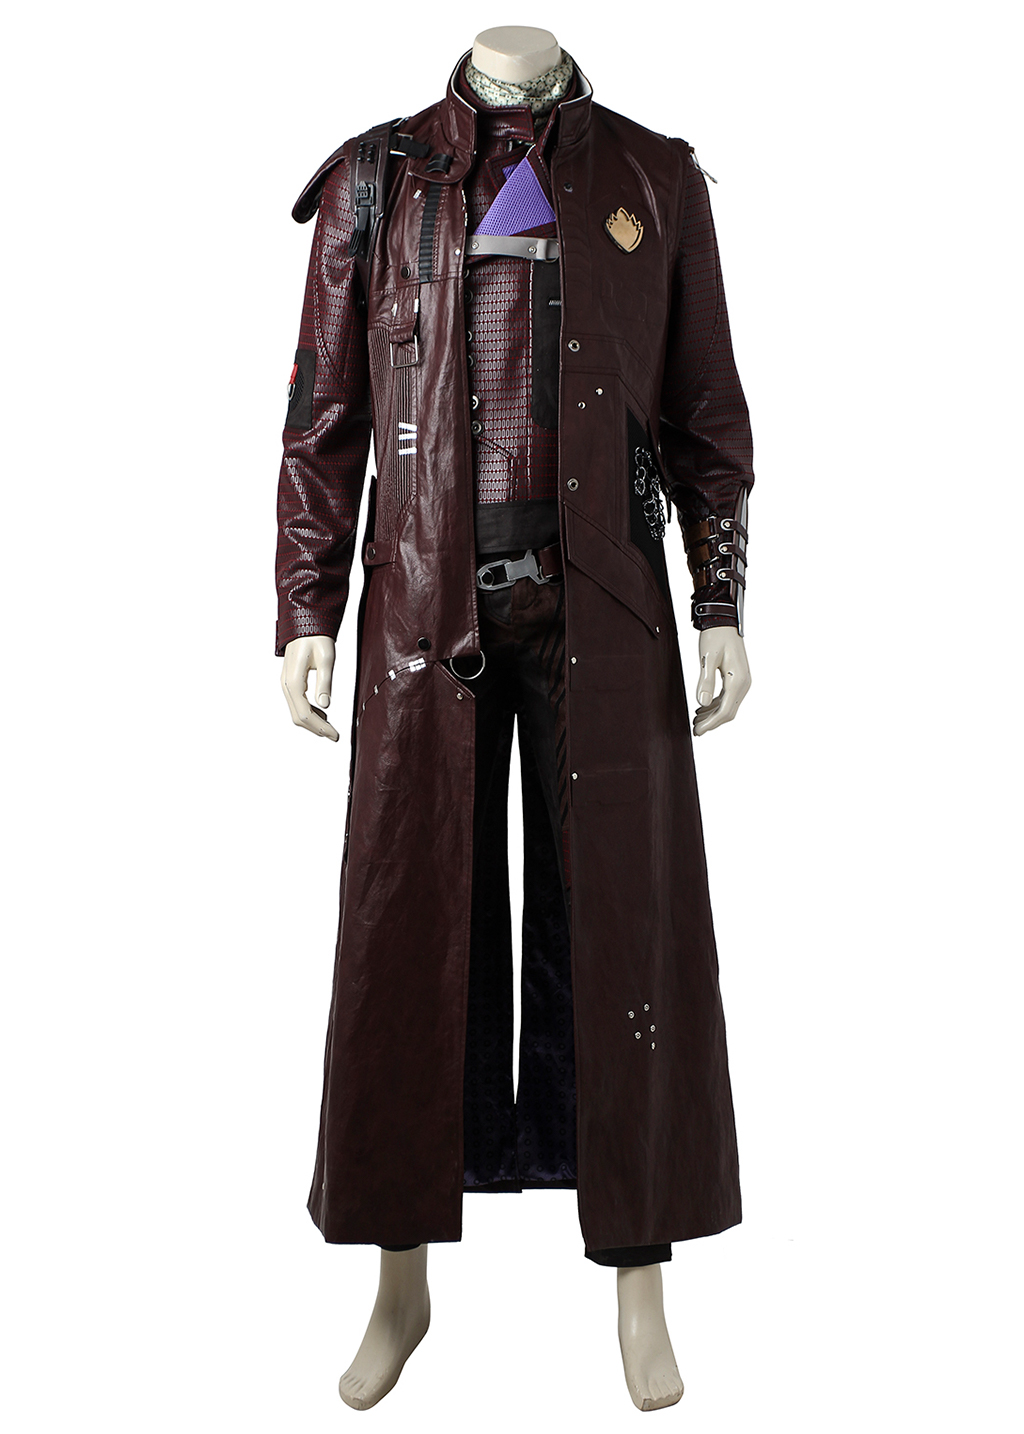 Yondu Udonta Costume Guardians of the Galaxy Vol. 2 Suit Cosplay